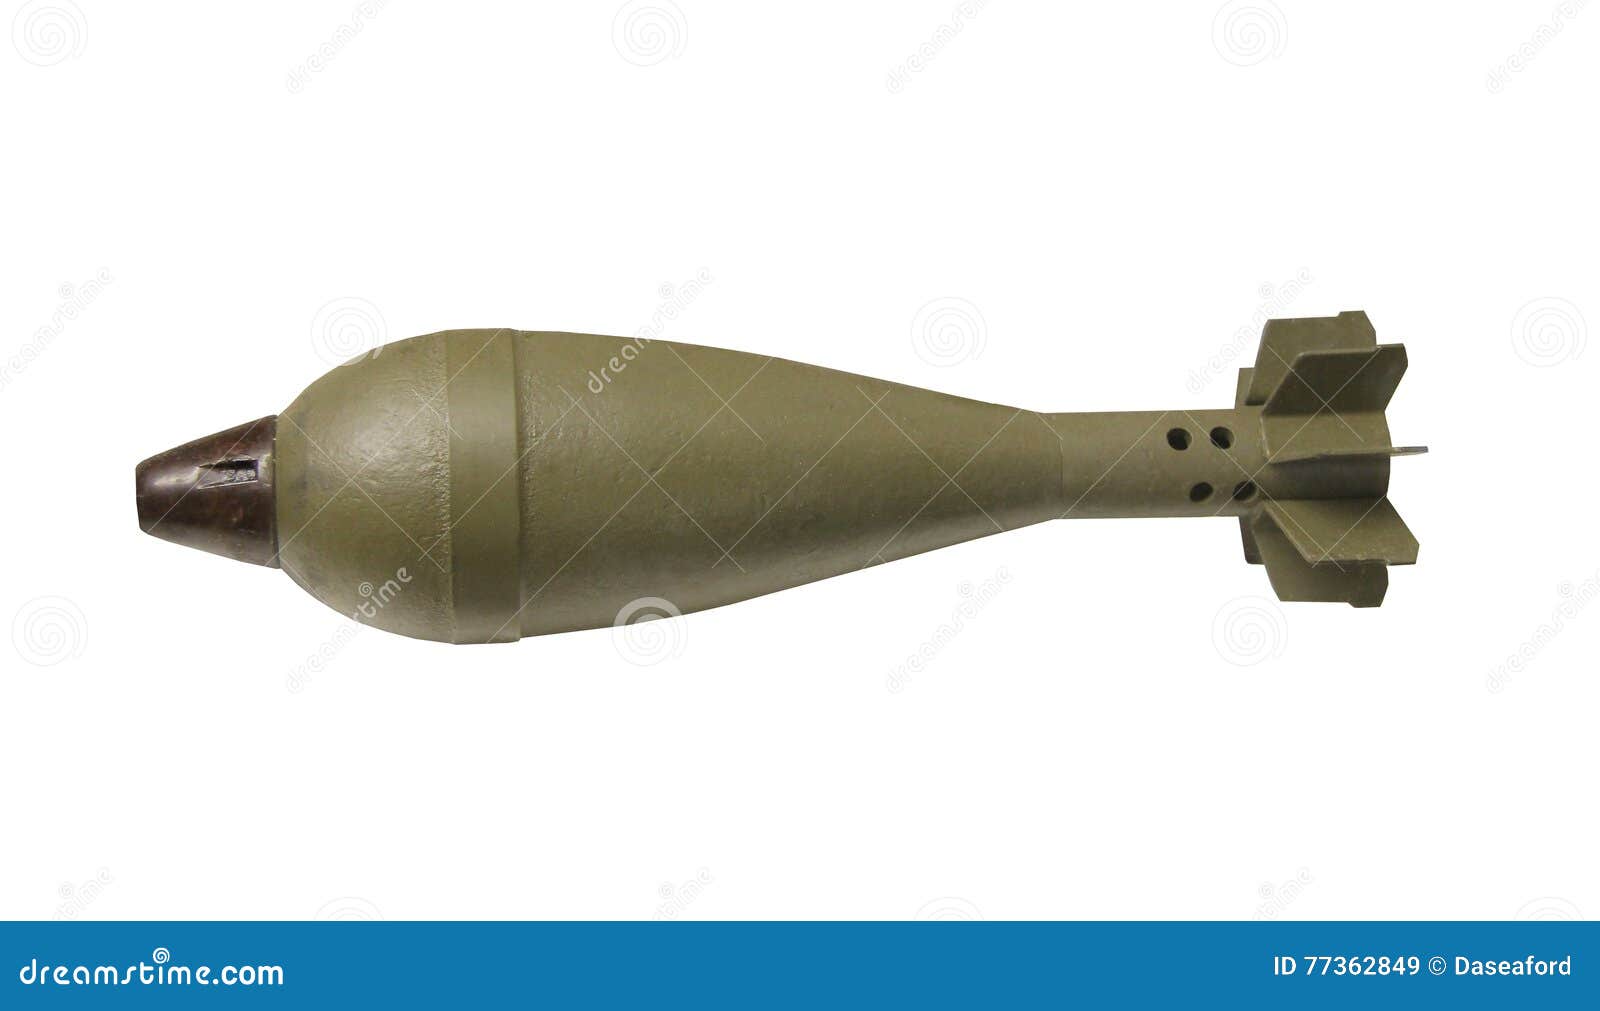 Mortar Bomb Artillery Shell. Stock Image - Image of shell, weapon: 77362849